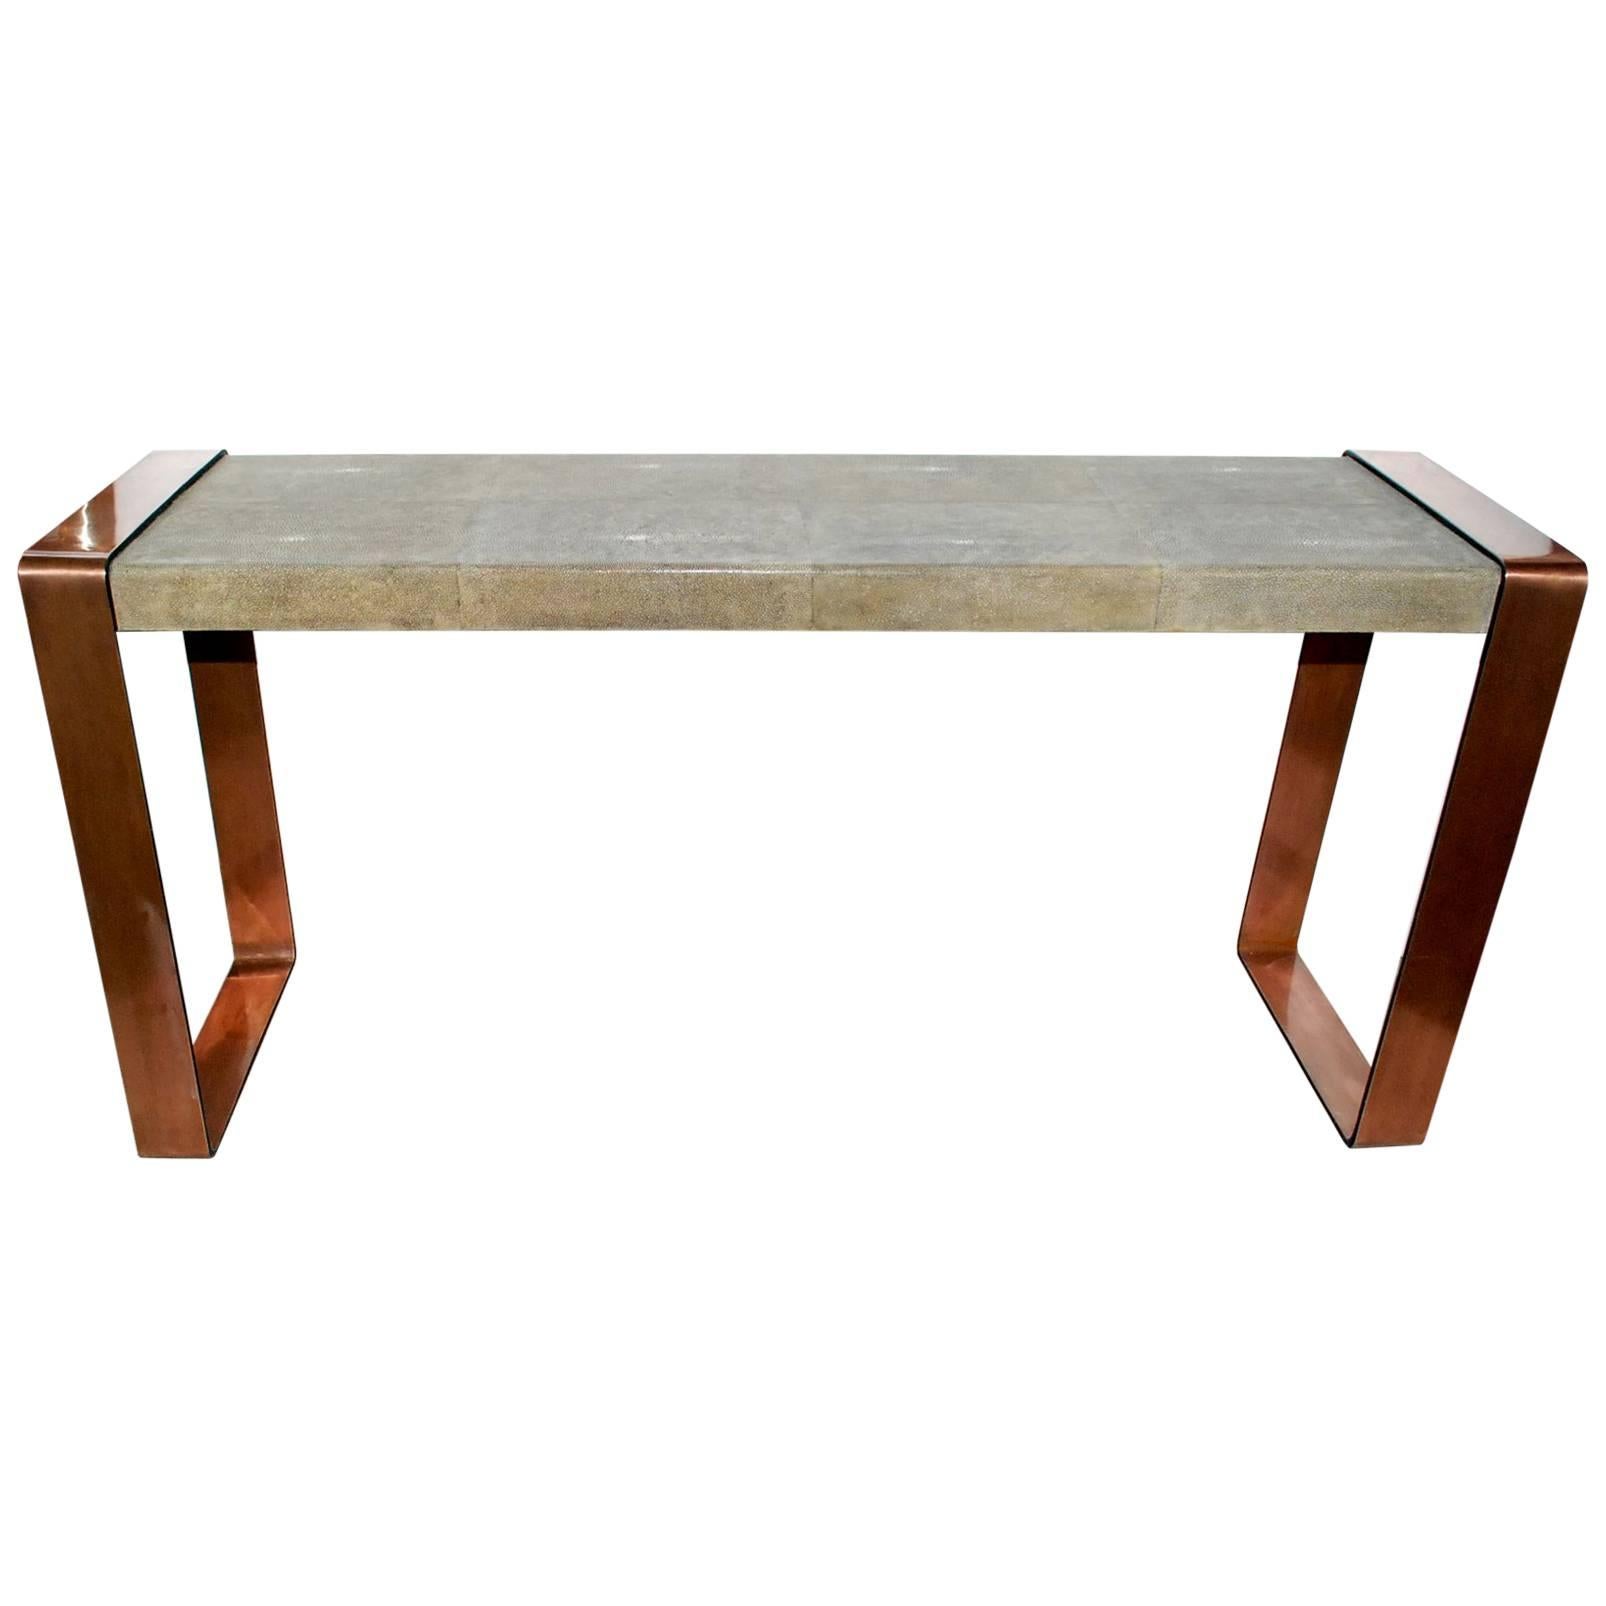 Shagreen Console Table with Copper Details